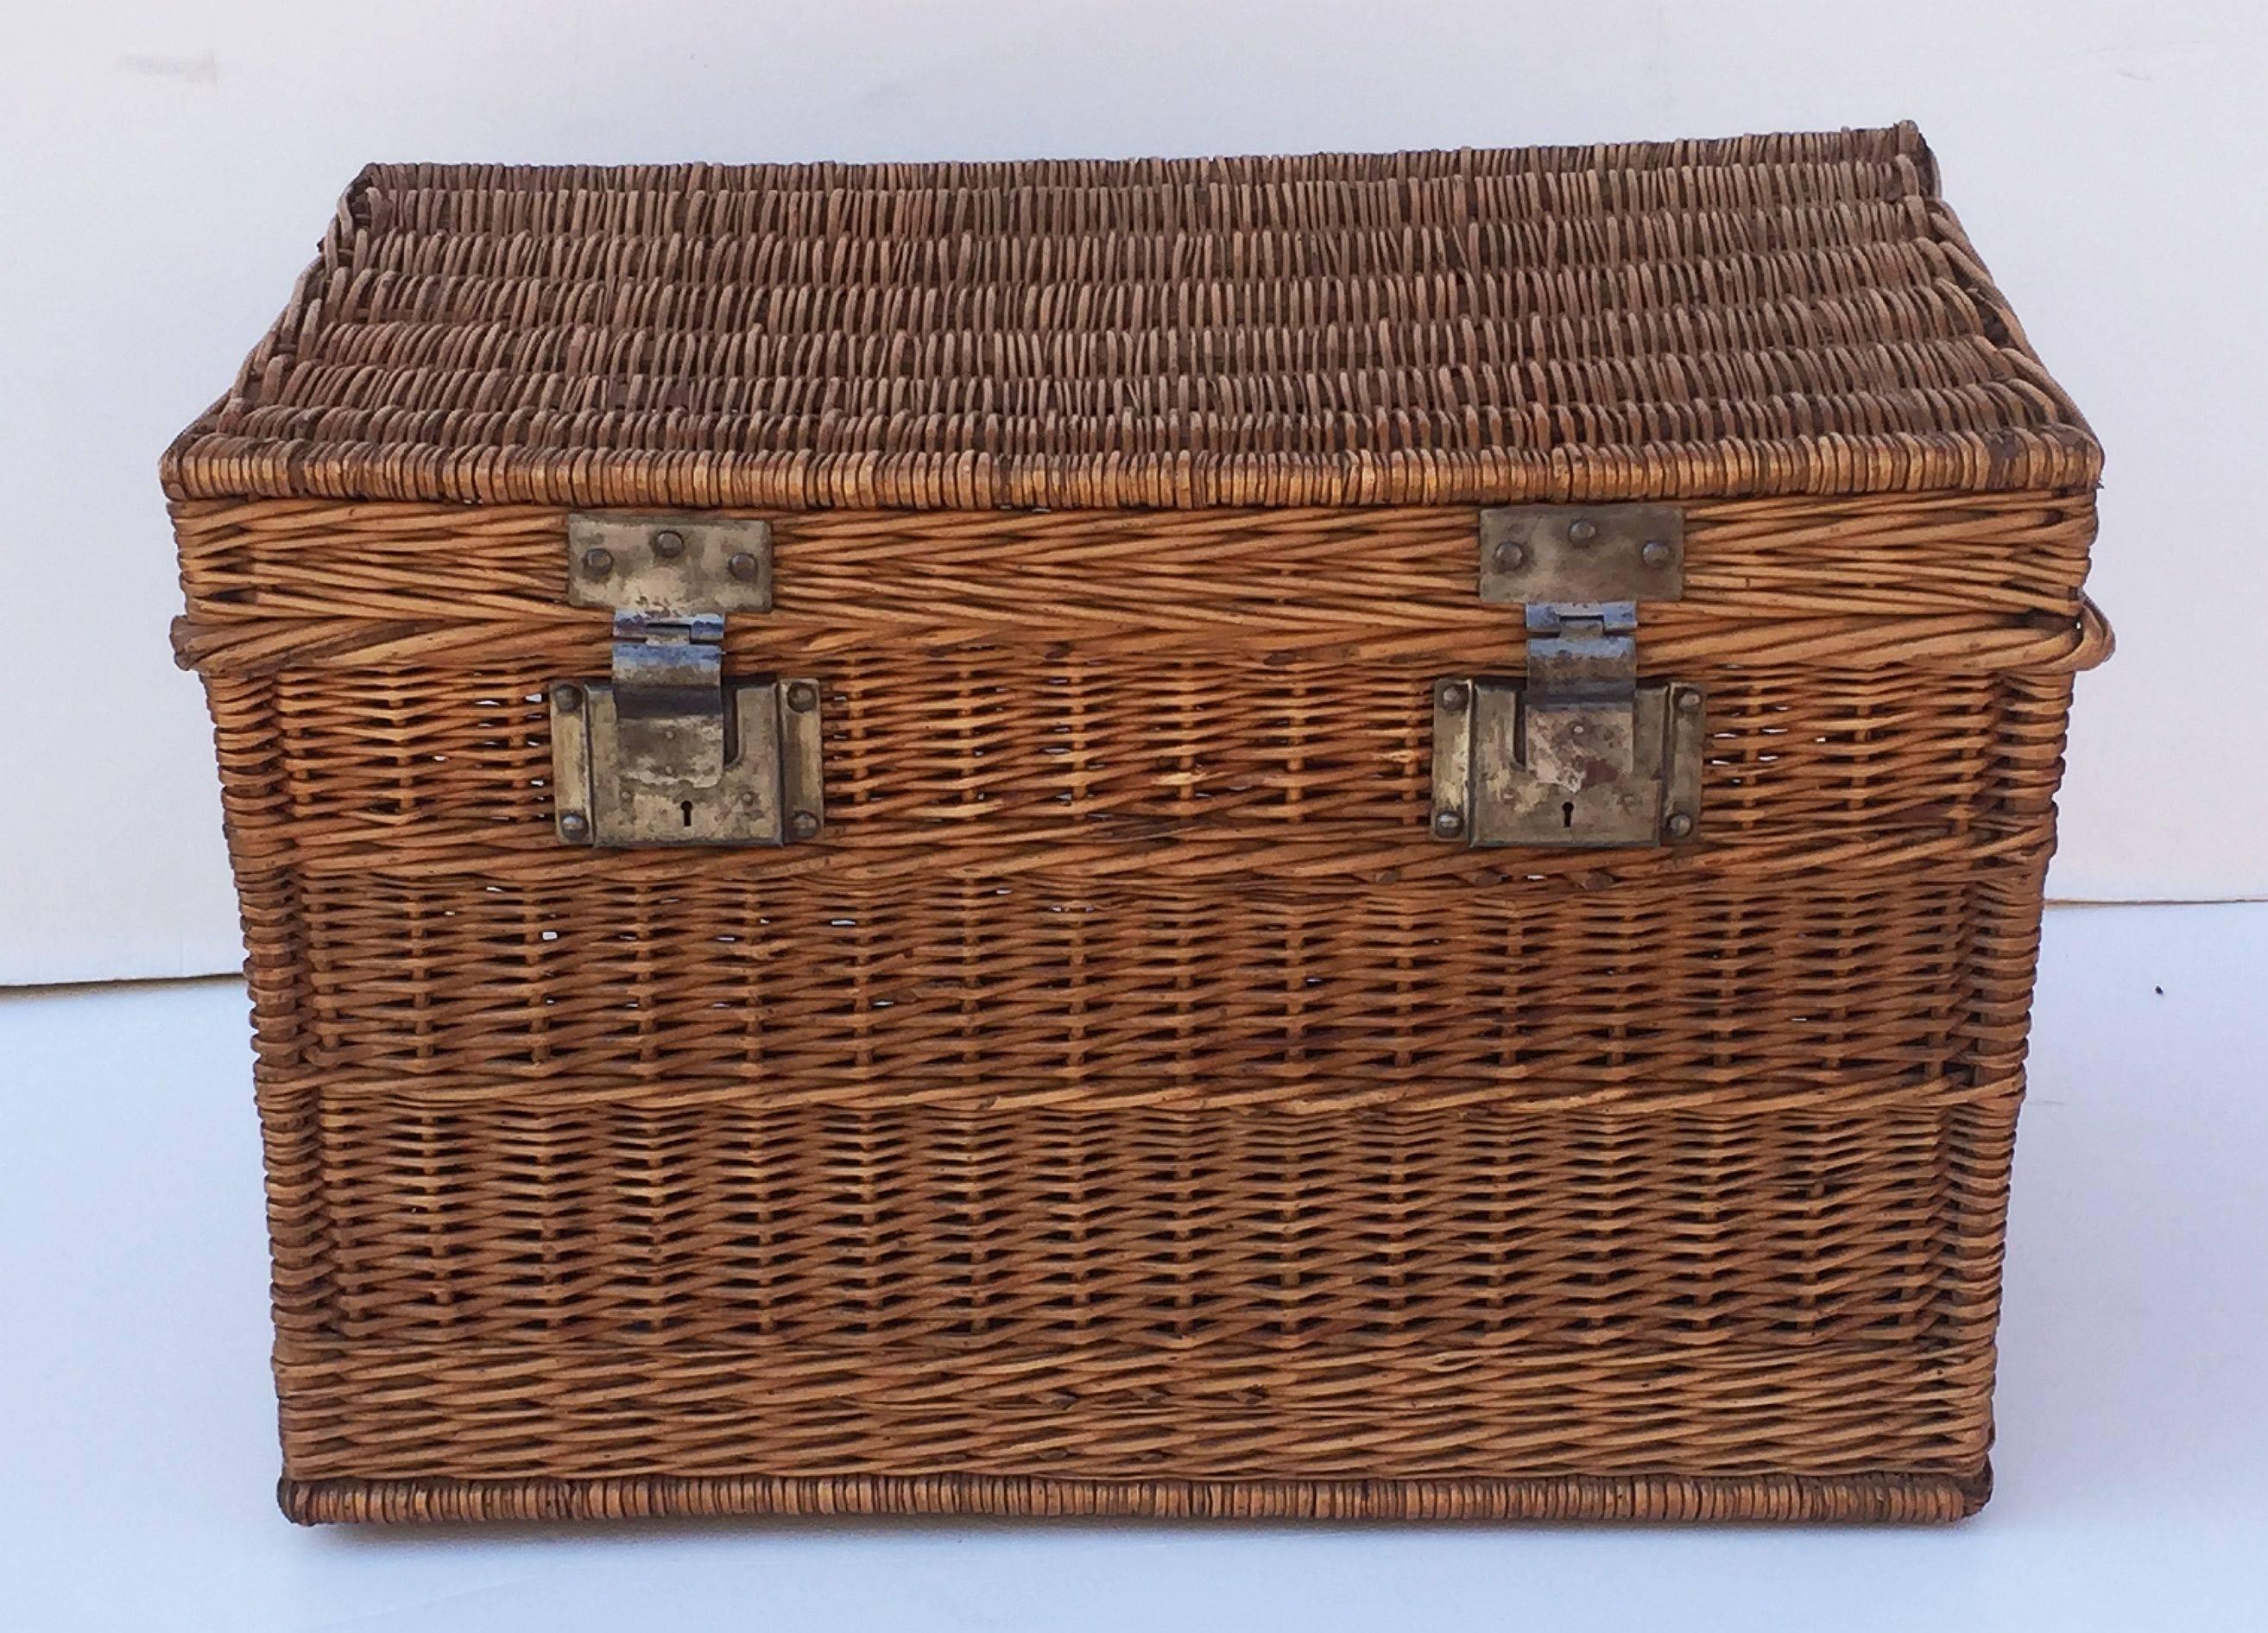 A large French basket hamper of woven willow with brushed steel hardware and handles on each side.

Several available in this style, slight variations of size, please enquire.